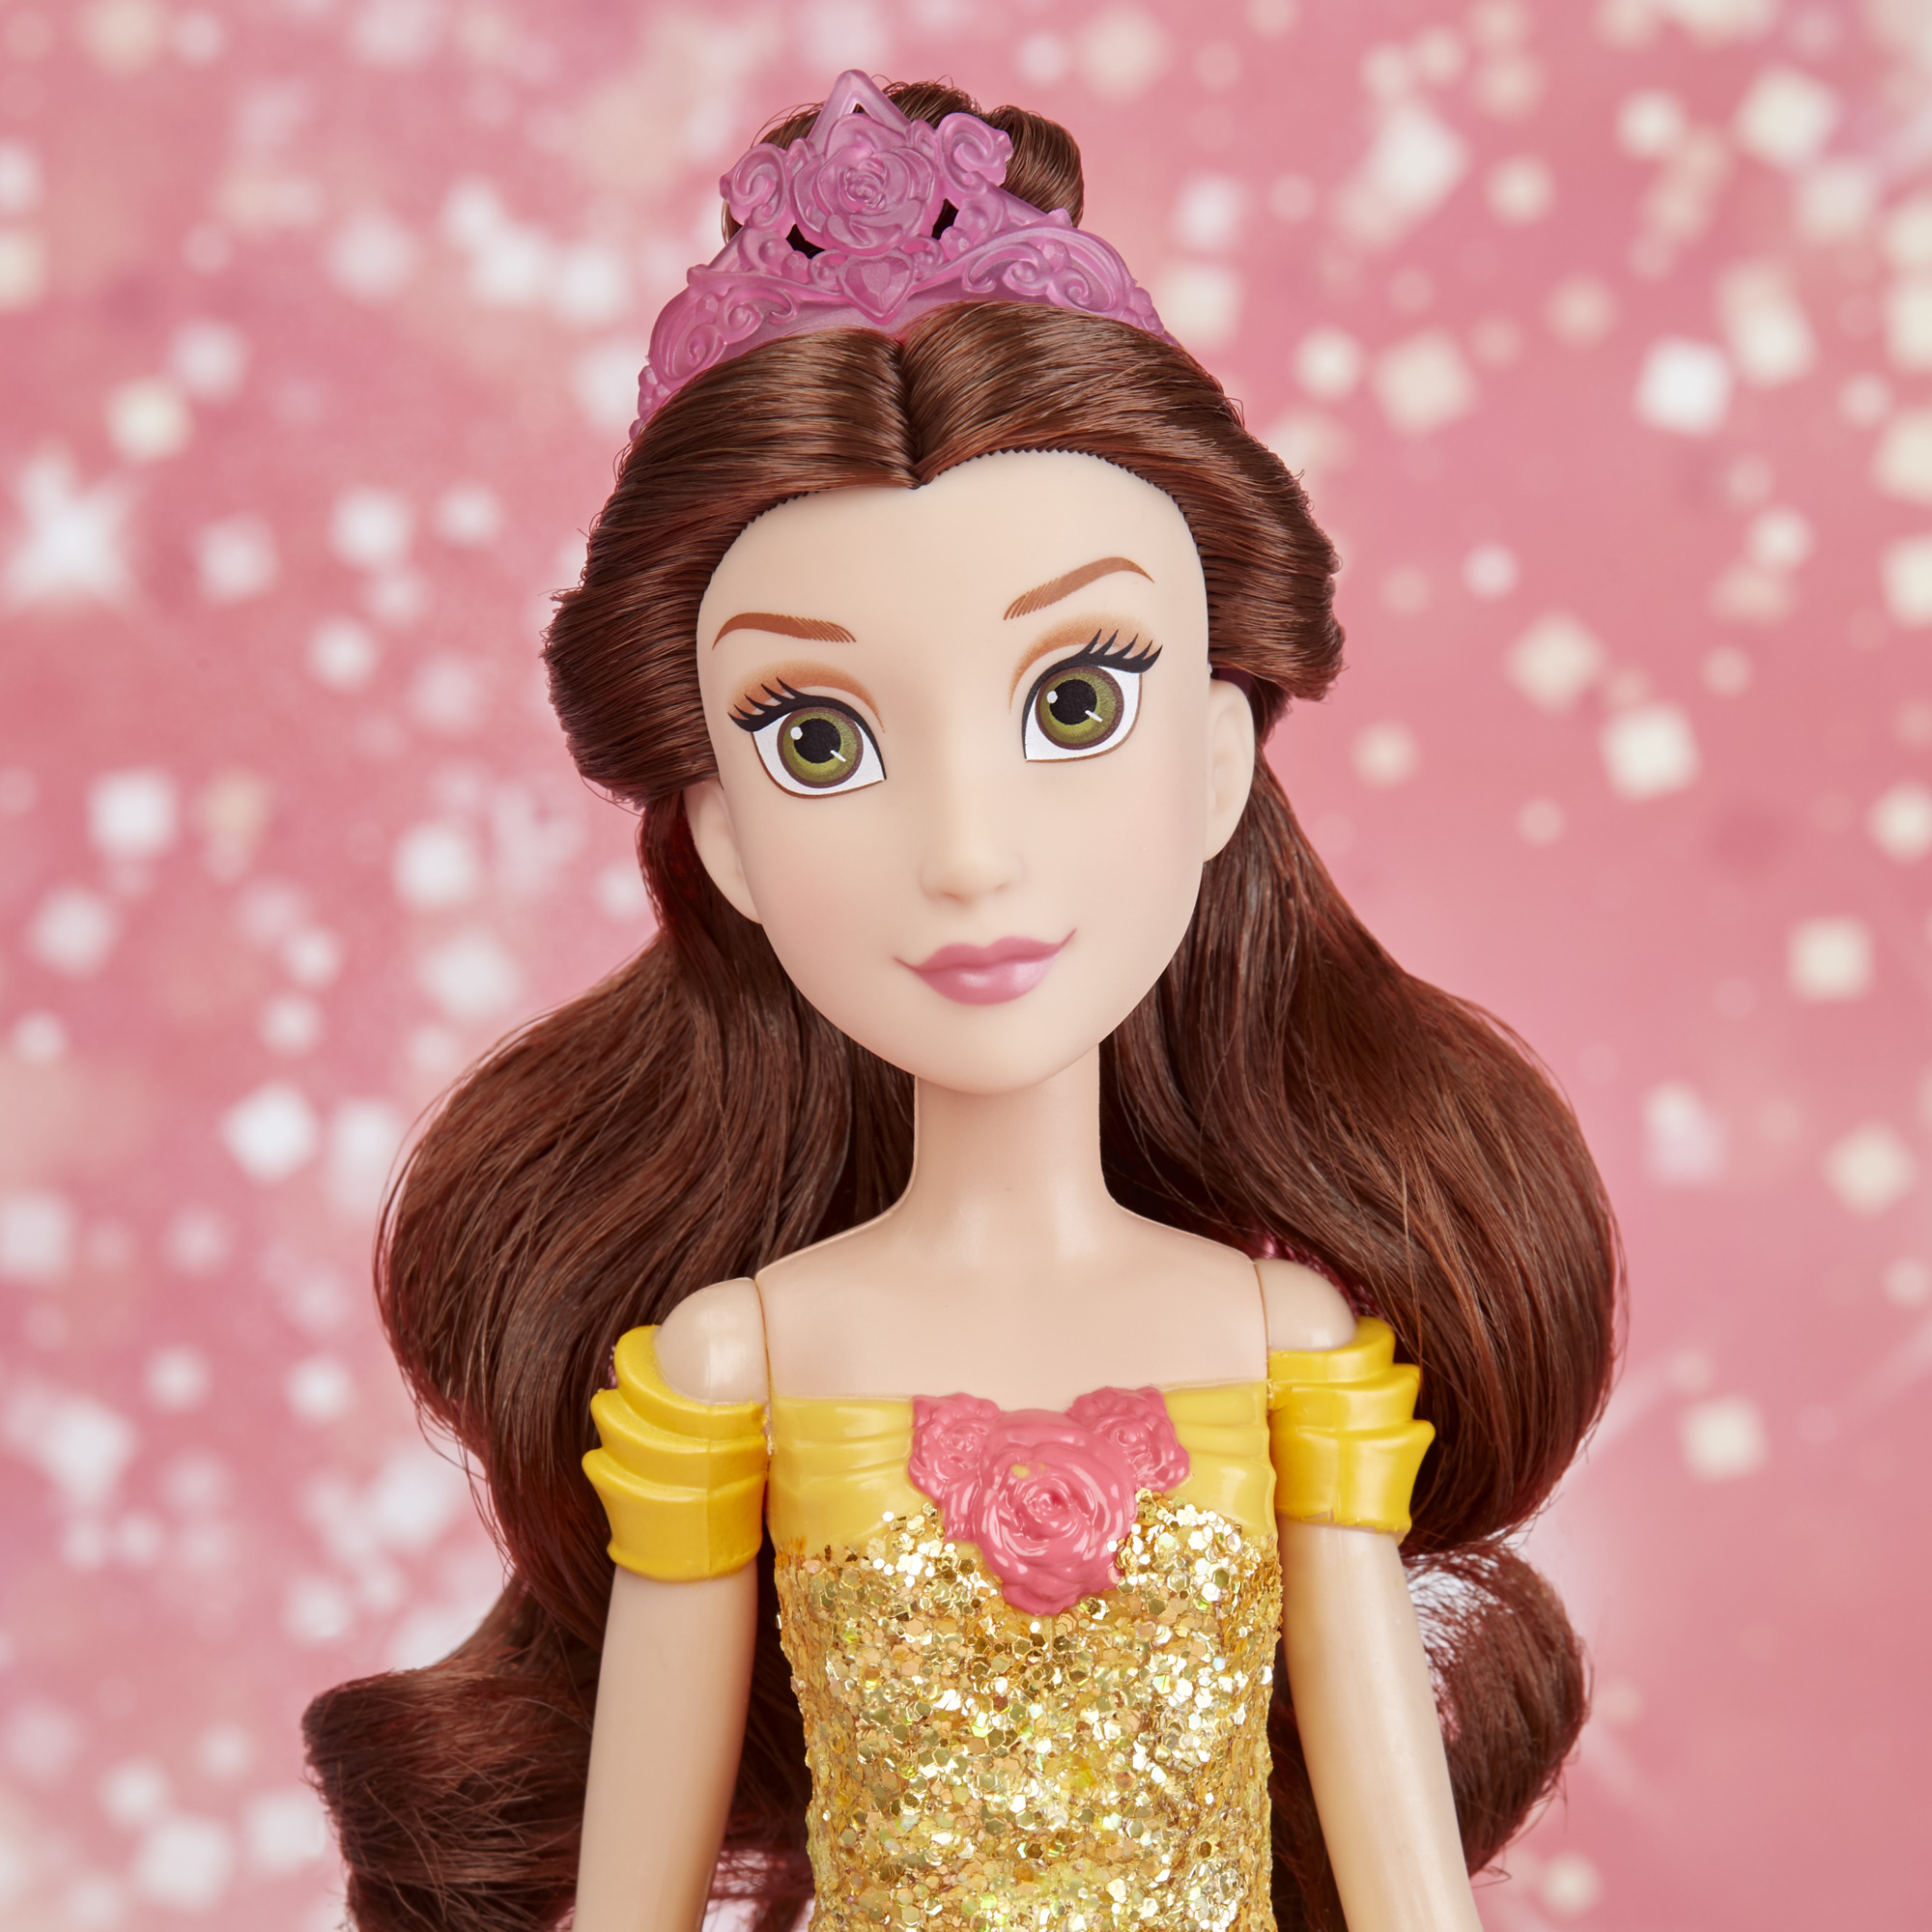 Disney Princess Royal Shimmer Belle with Sparkly Skirt, Includes Tiara and Shoes - image 13 of 16